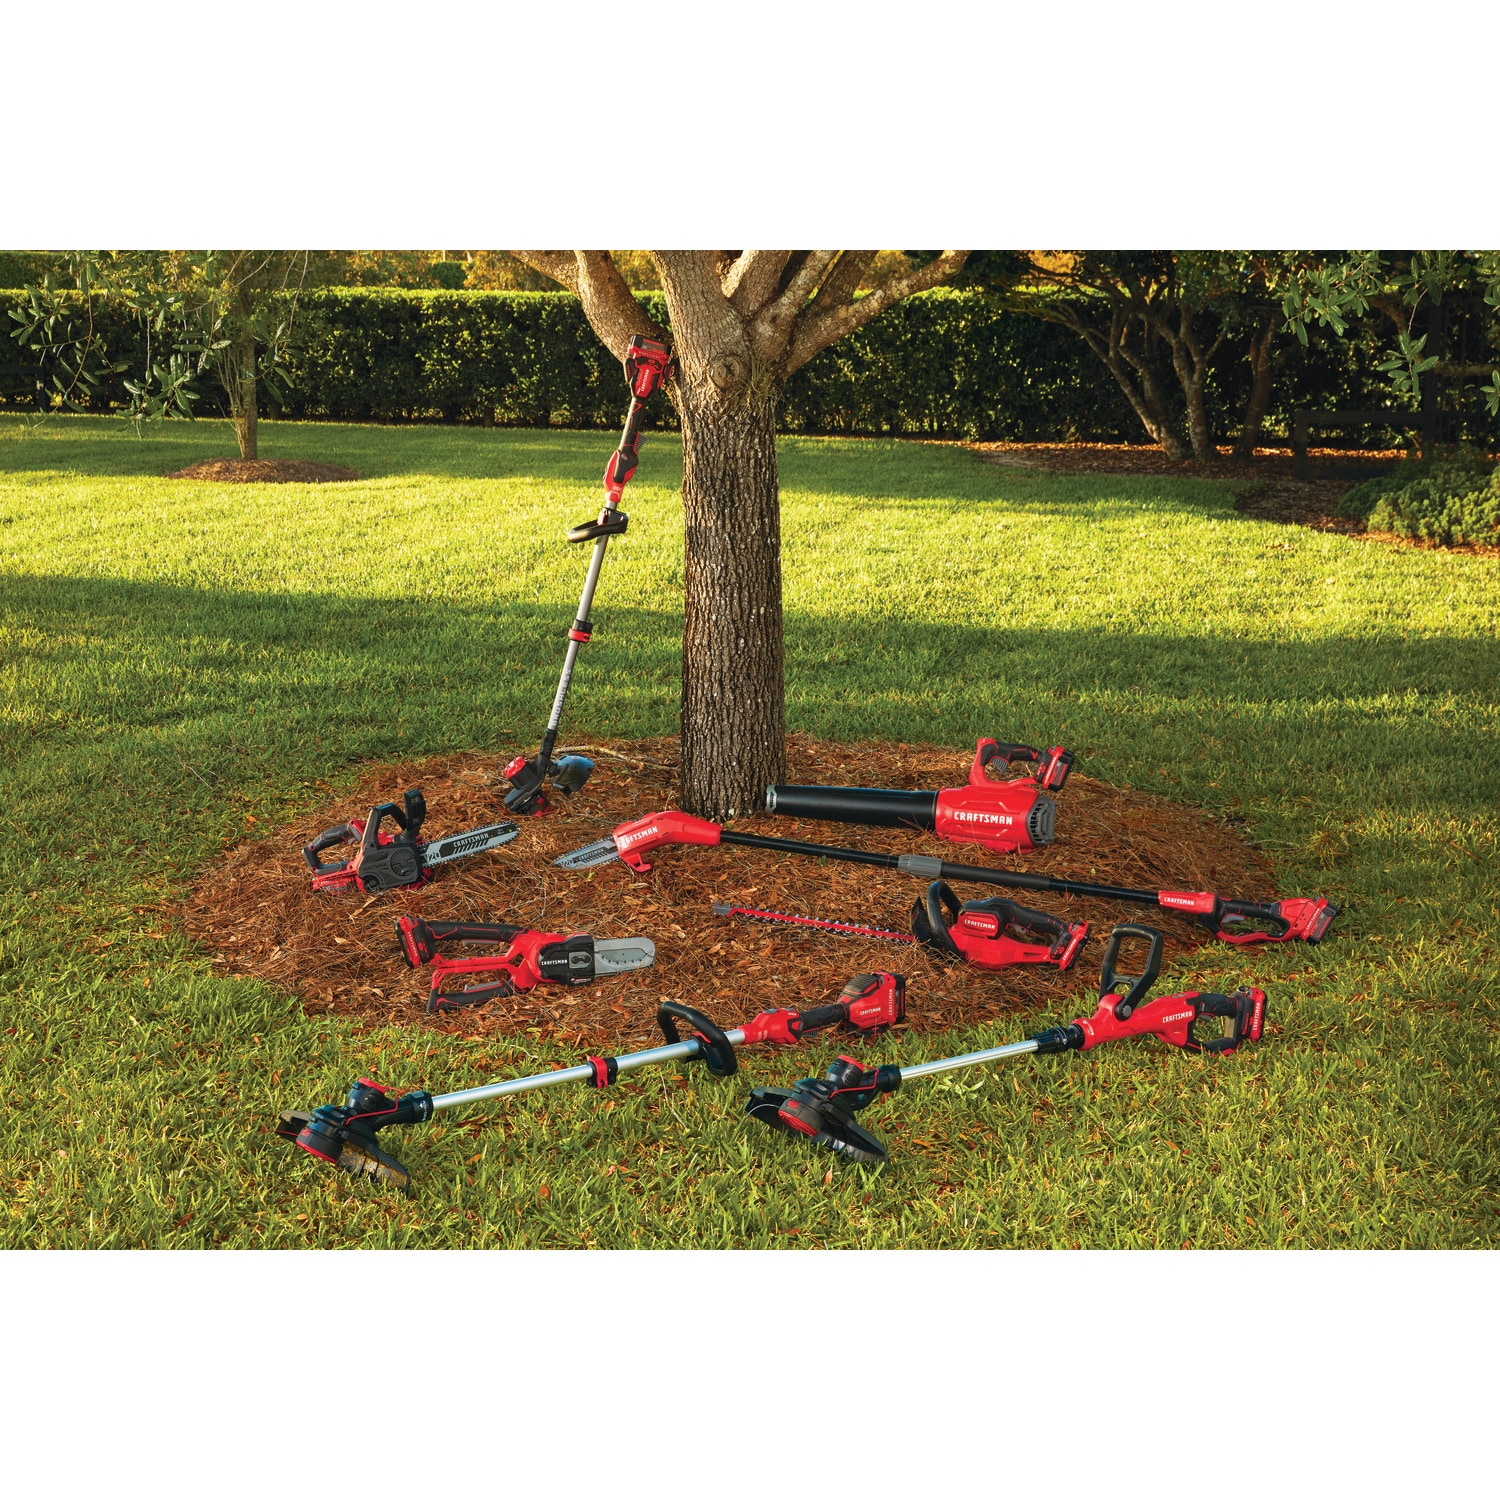 CRAFTSMAN CMCST900D1 V20* Cordless WEEDWACKER® String Trimmer/Edger -  Automatic Line Advance Feed with CMZST0653 3 pack .065 inch string trimmer